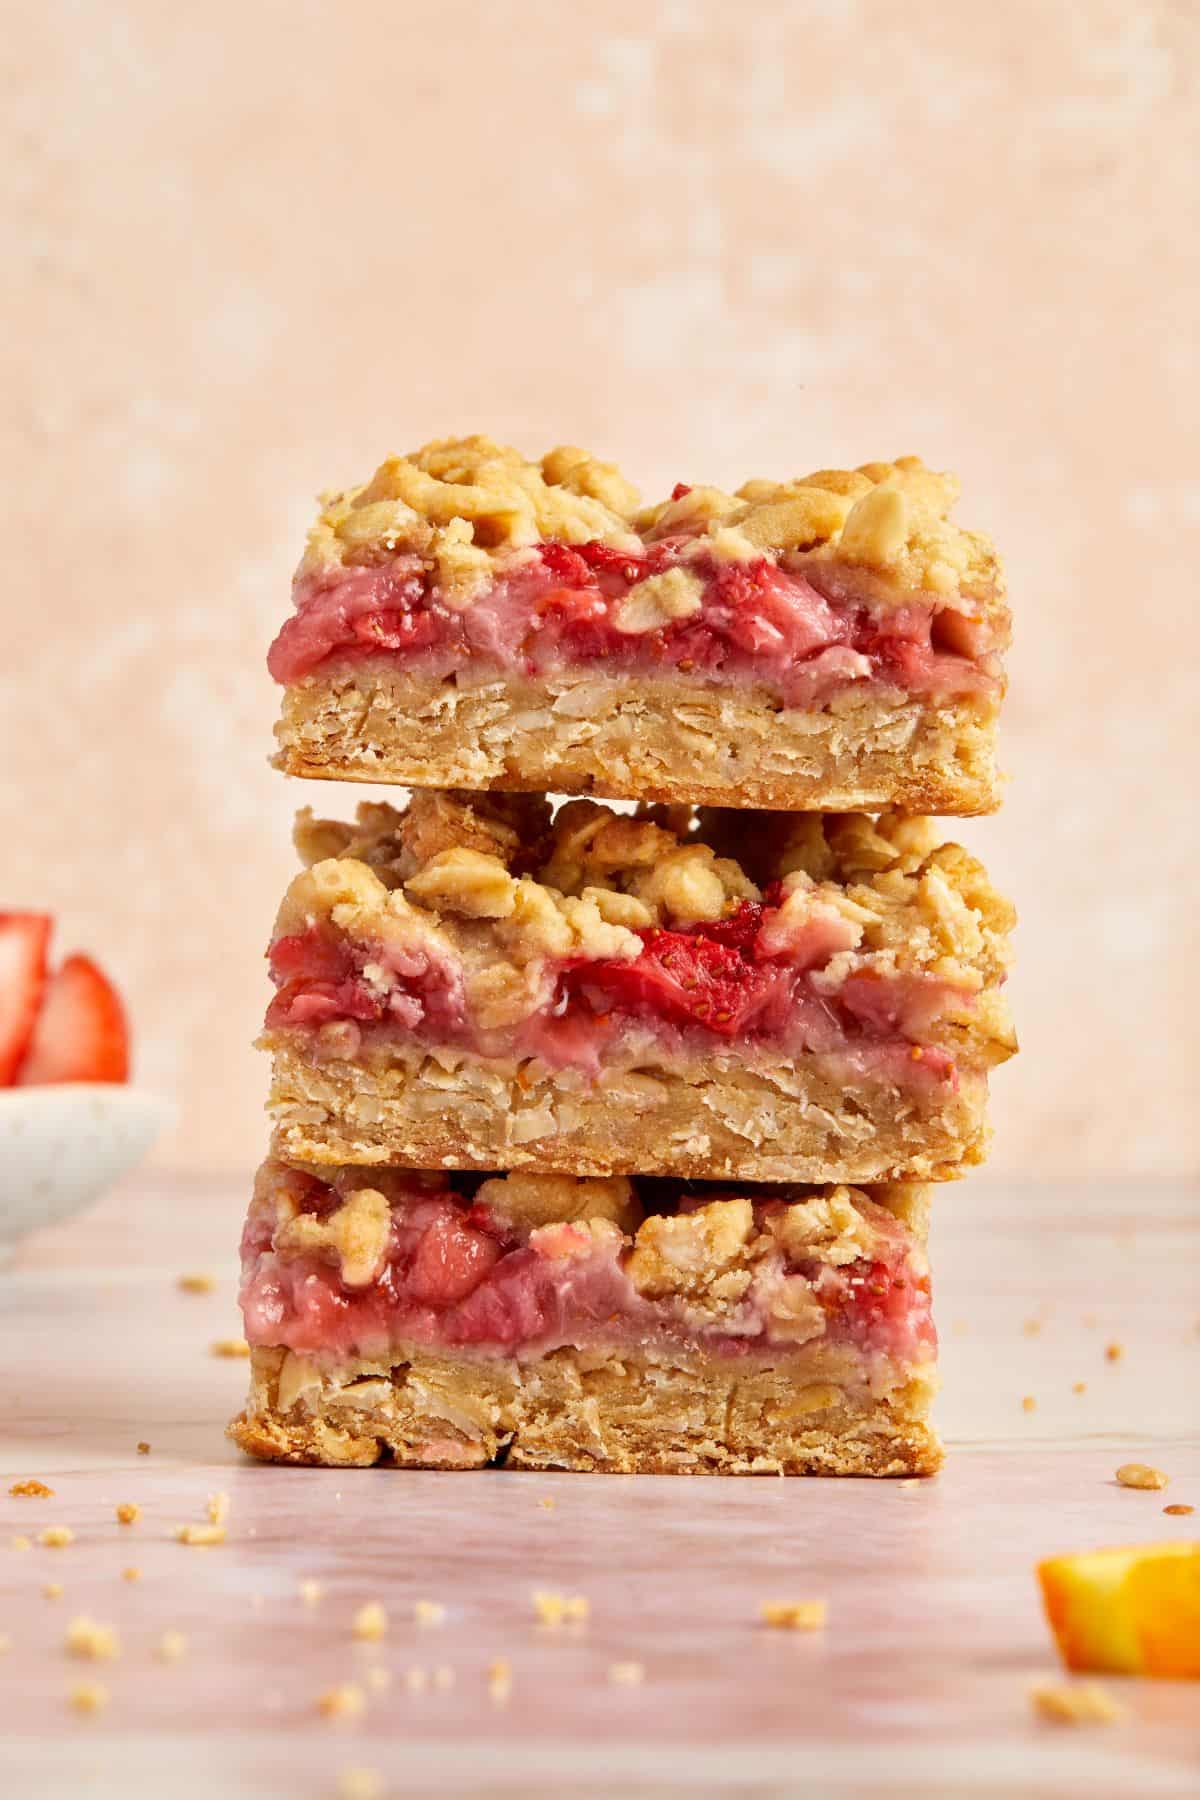 Stack of three pieces of Strawberry Oatmeal Bars.